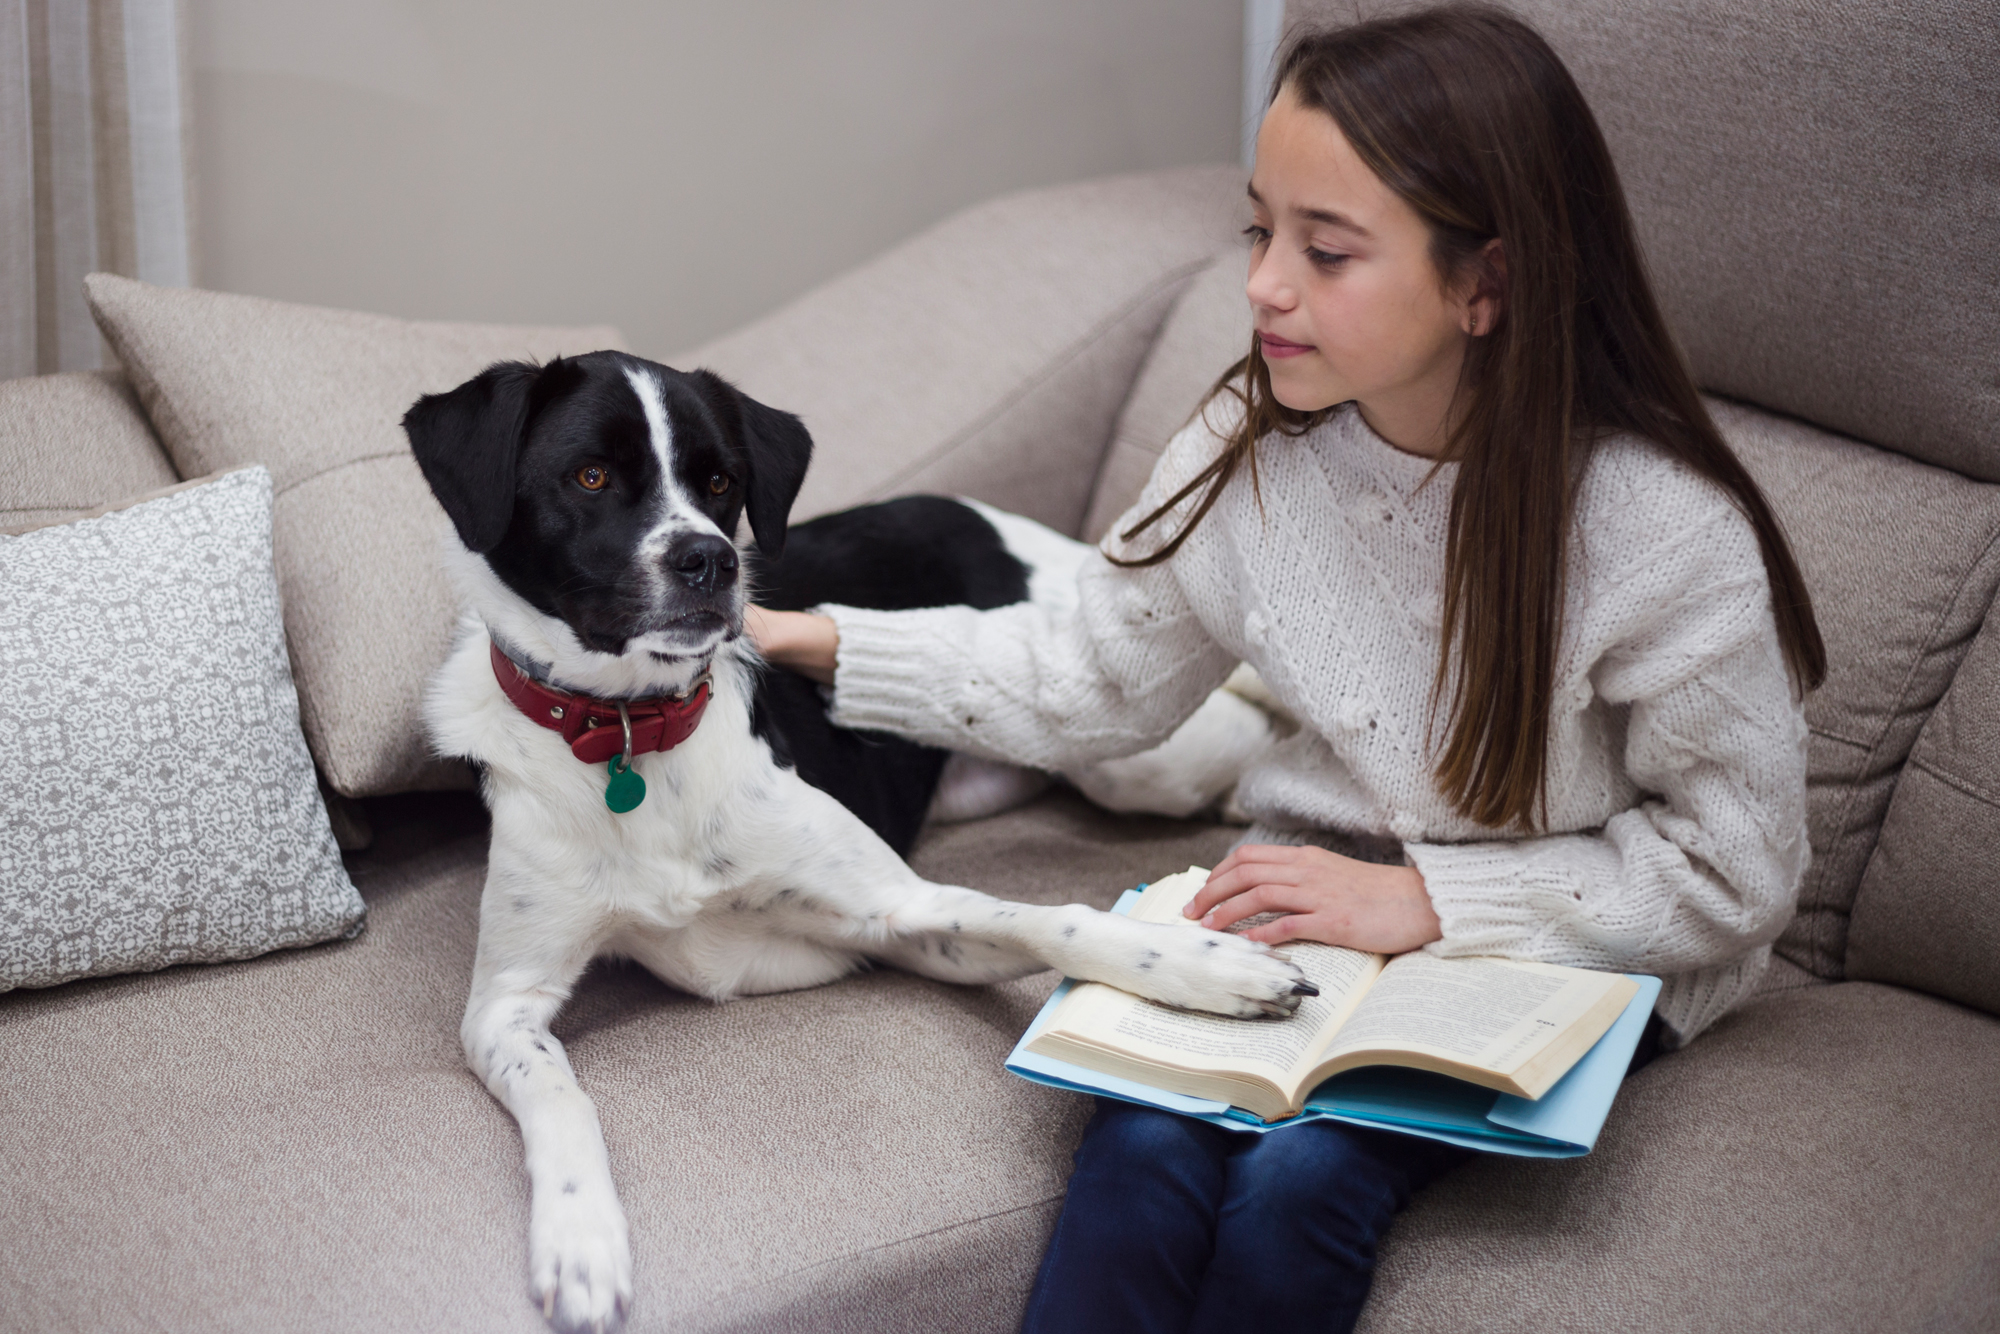 Children’s Books To Help Deal With The Loss Of A Pet